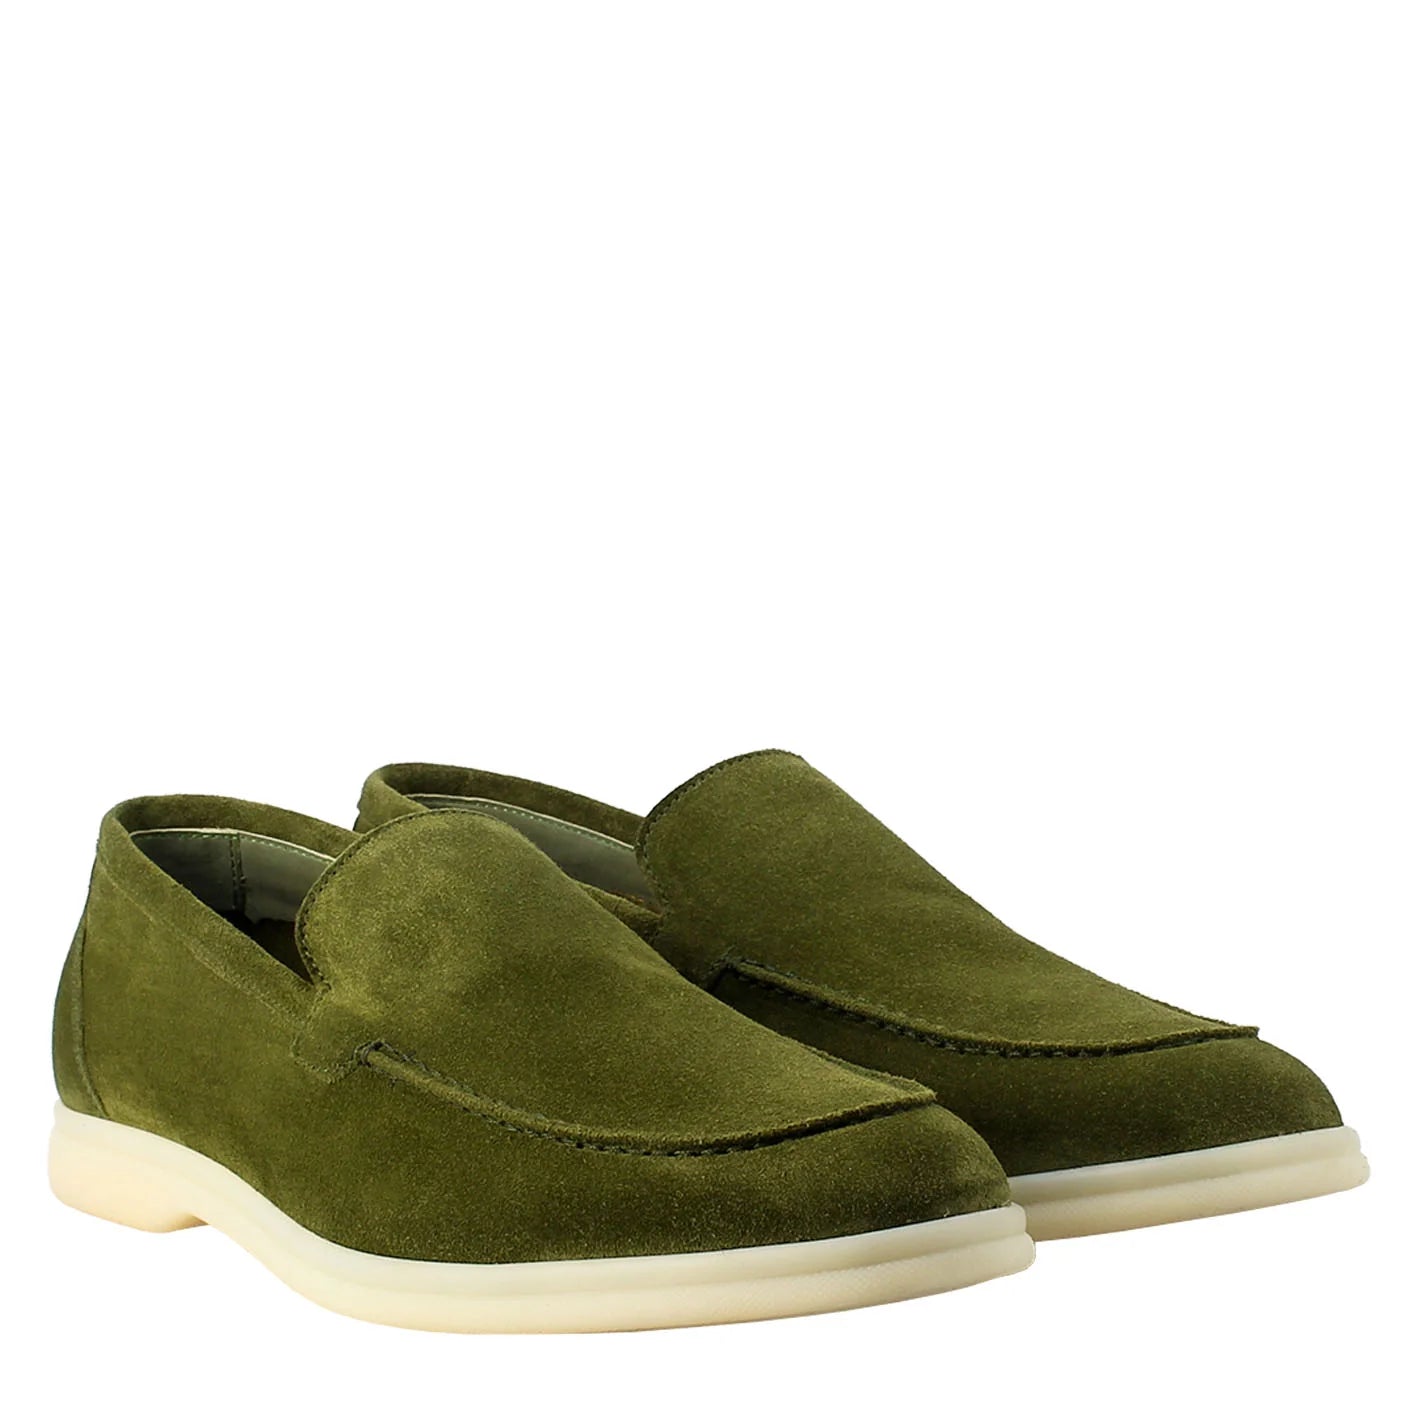 Green Unlined Moccasin in Suede